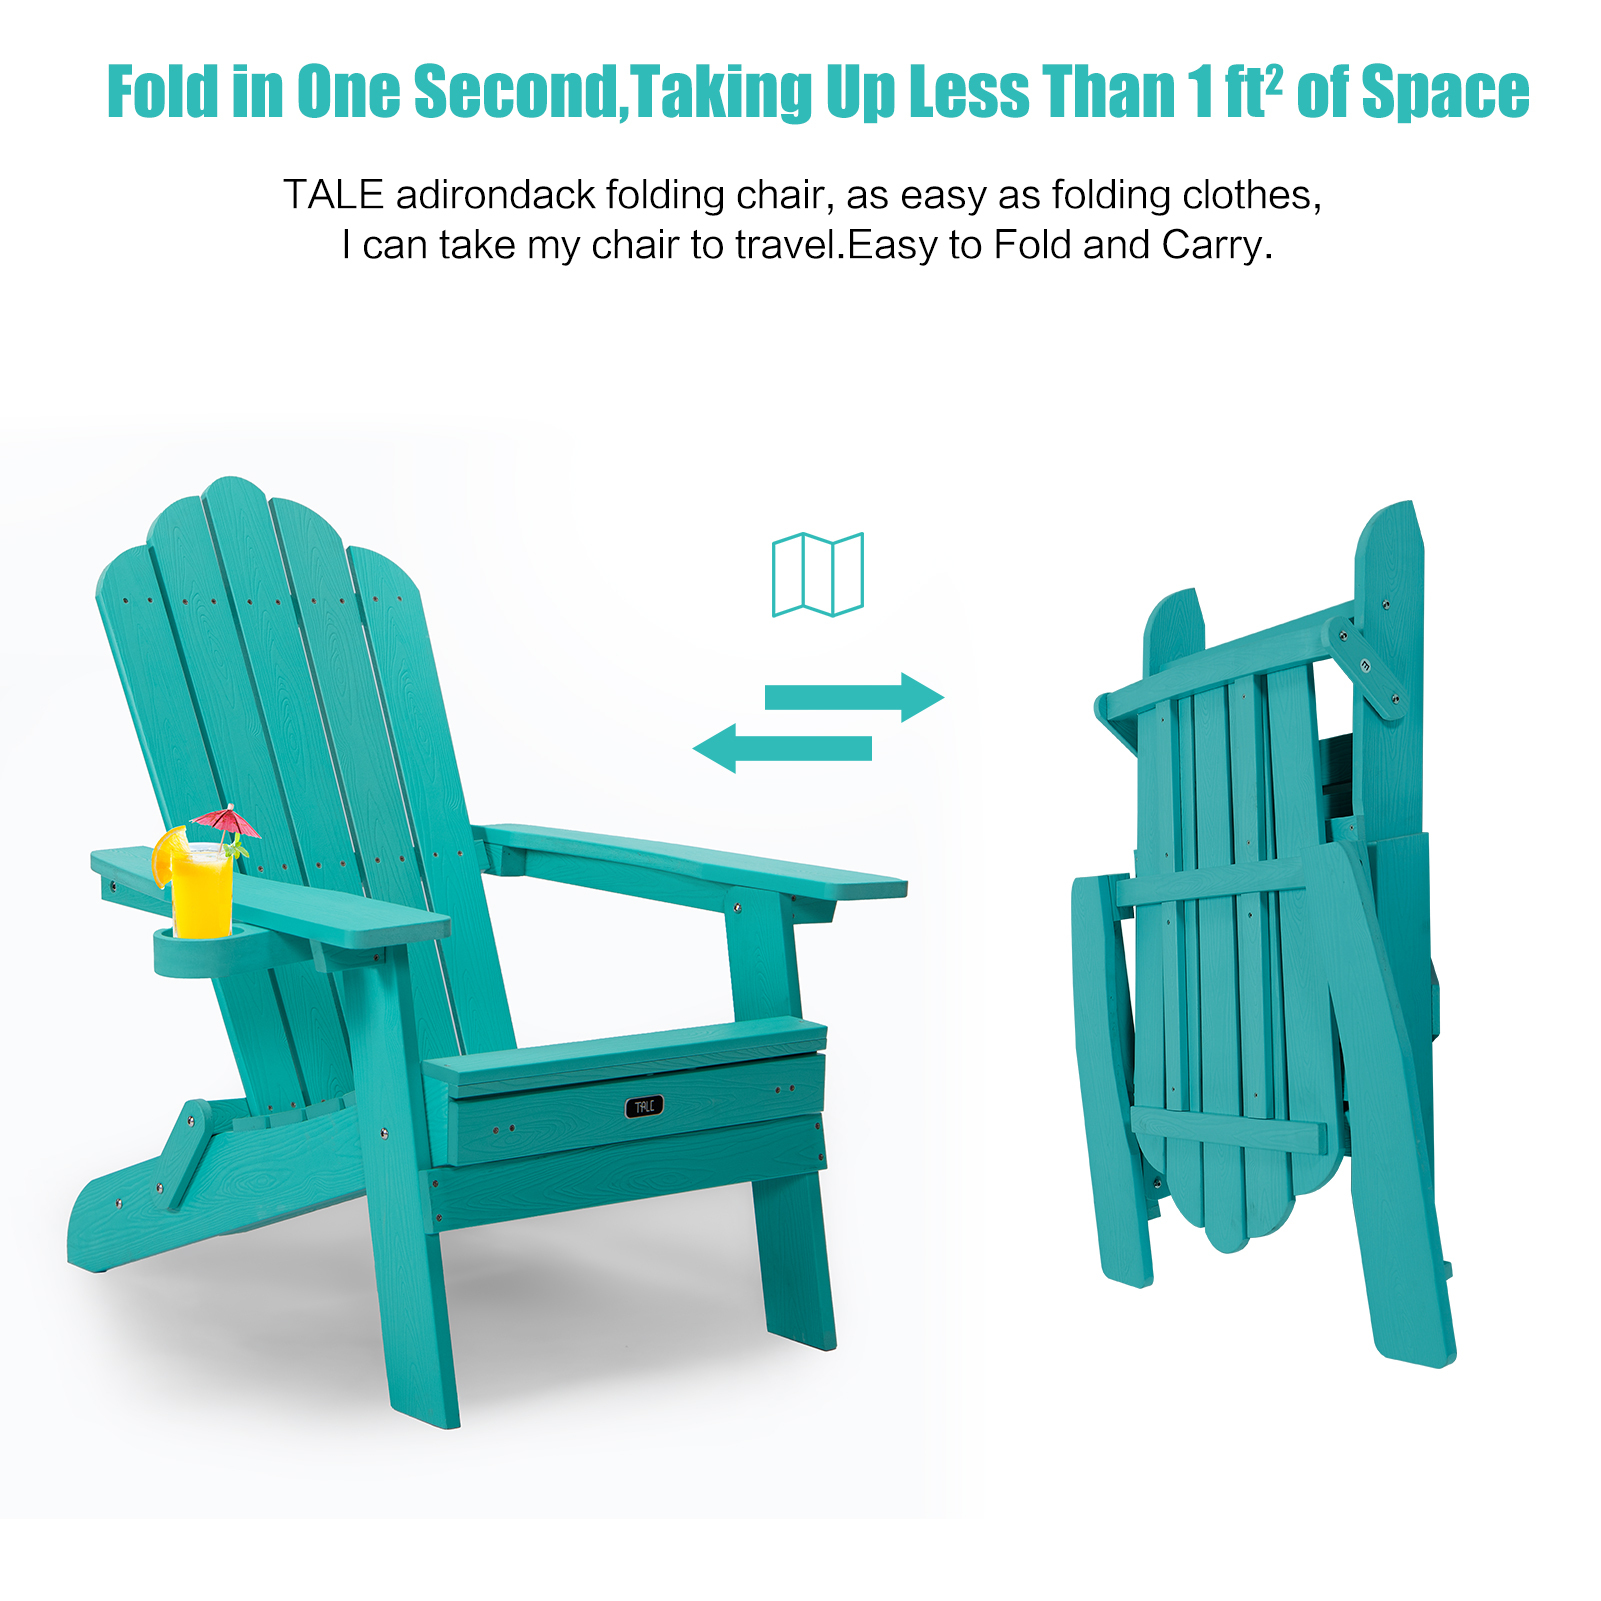 GZXS Folding Adirondack Chair with Pullout Ottoman and Cup Holder, Oaversized Wood Lounge Chair for Patio Deck Garden, Backyard Furniture, Green - image 5 of 10